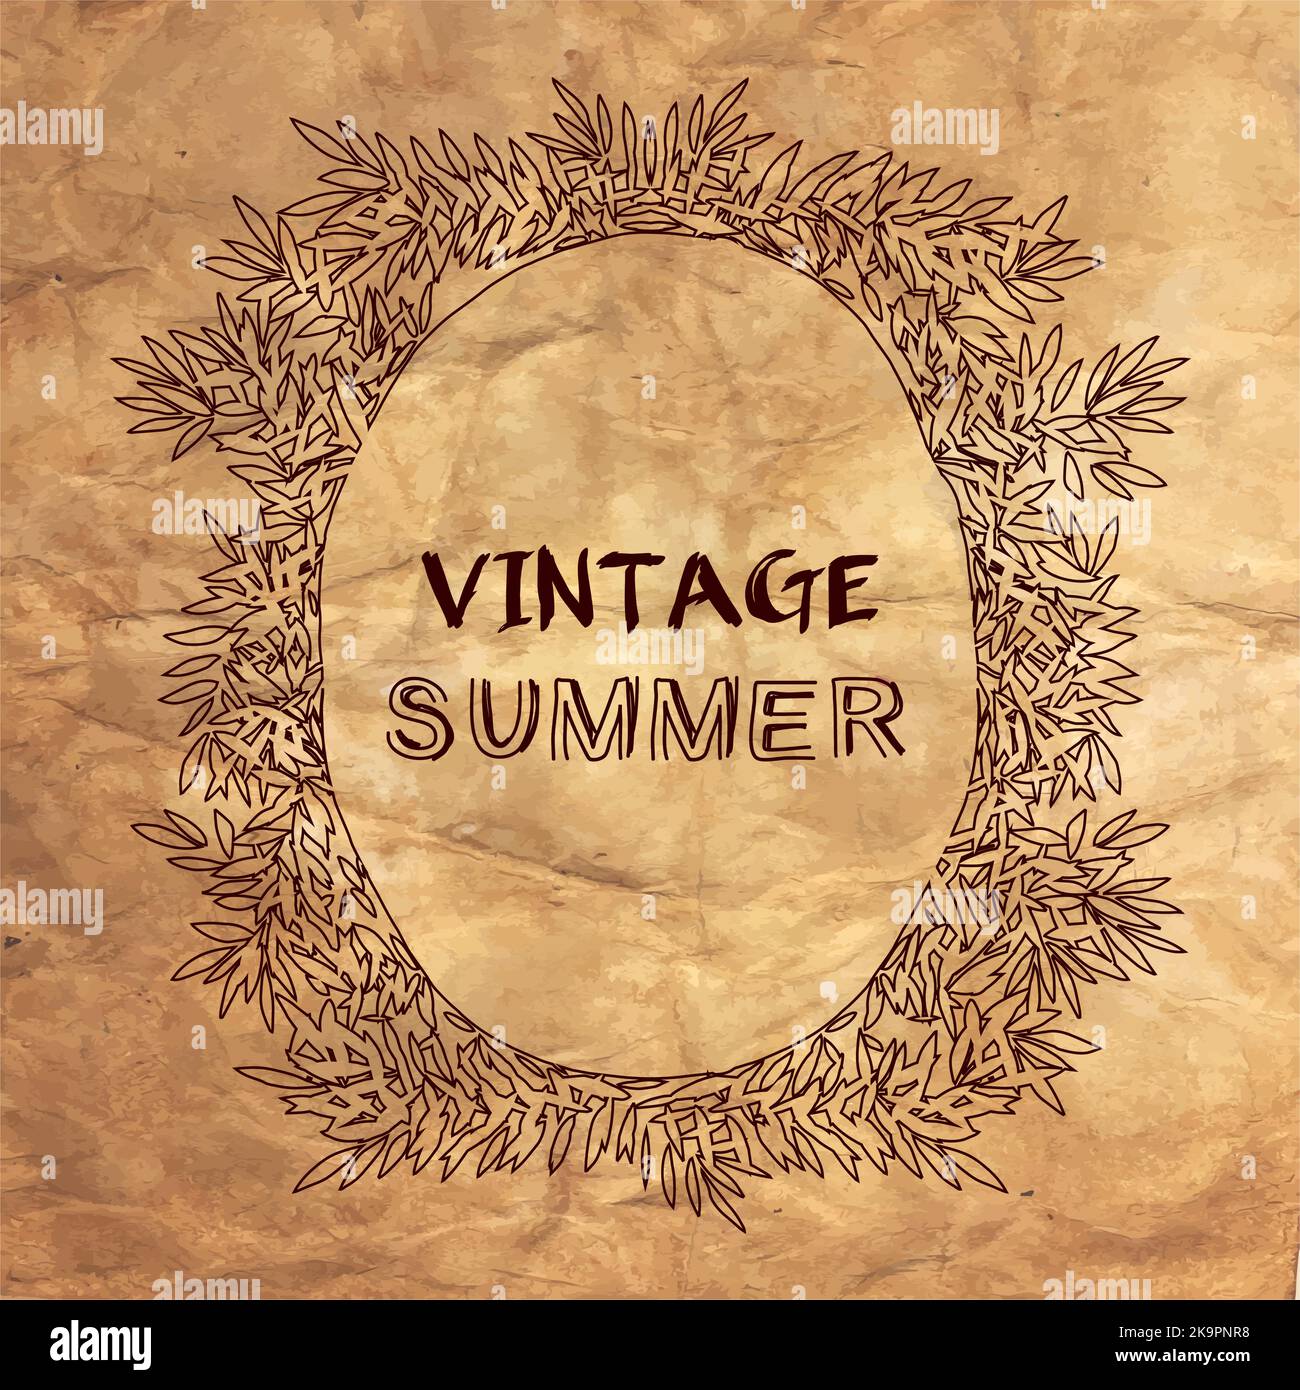 Vintage summer postcard. Vector illustration on aged crumpled paper texture. Stock Vector